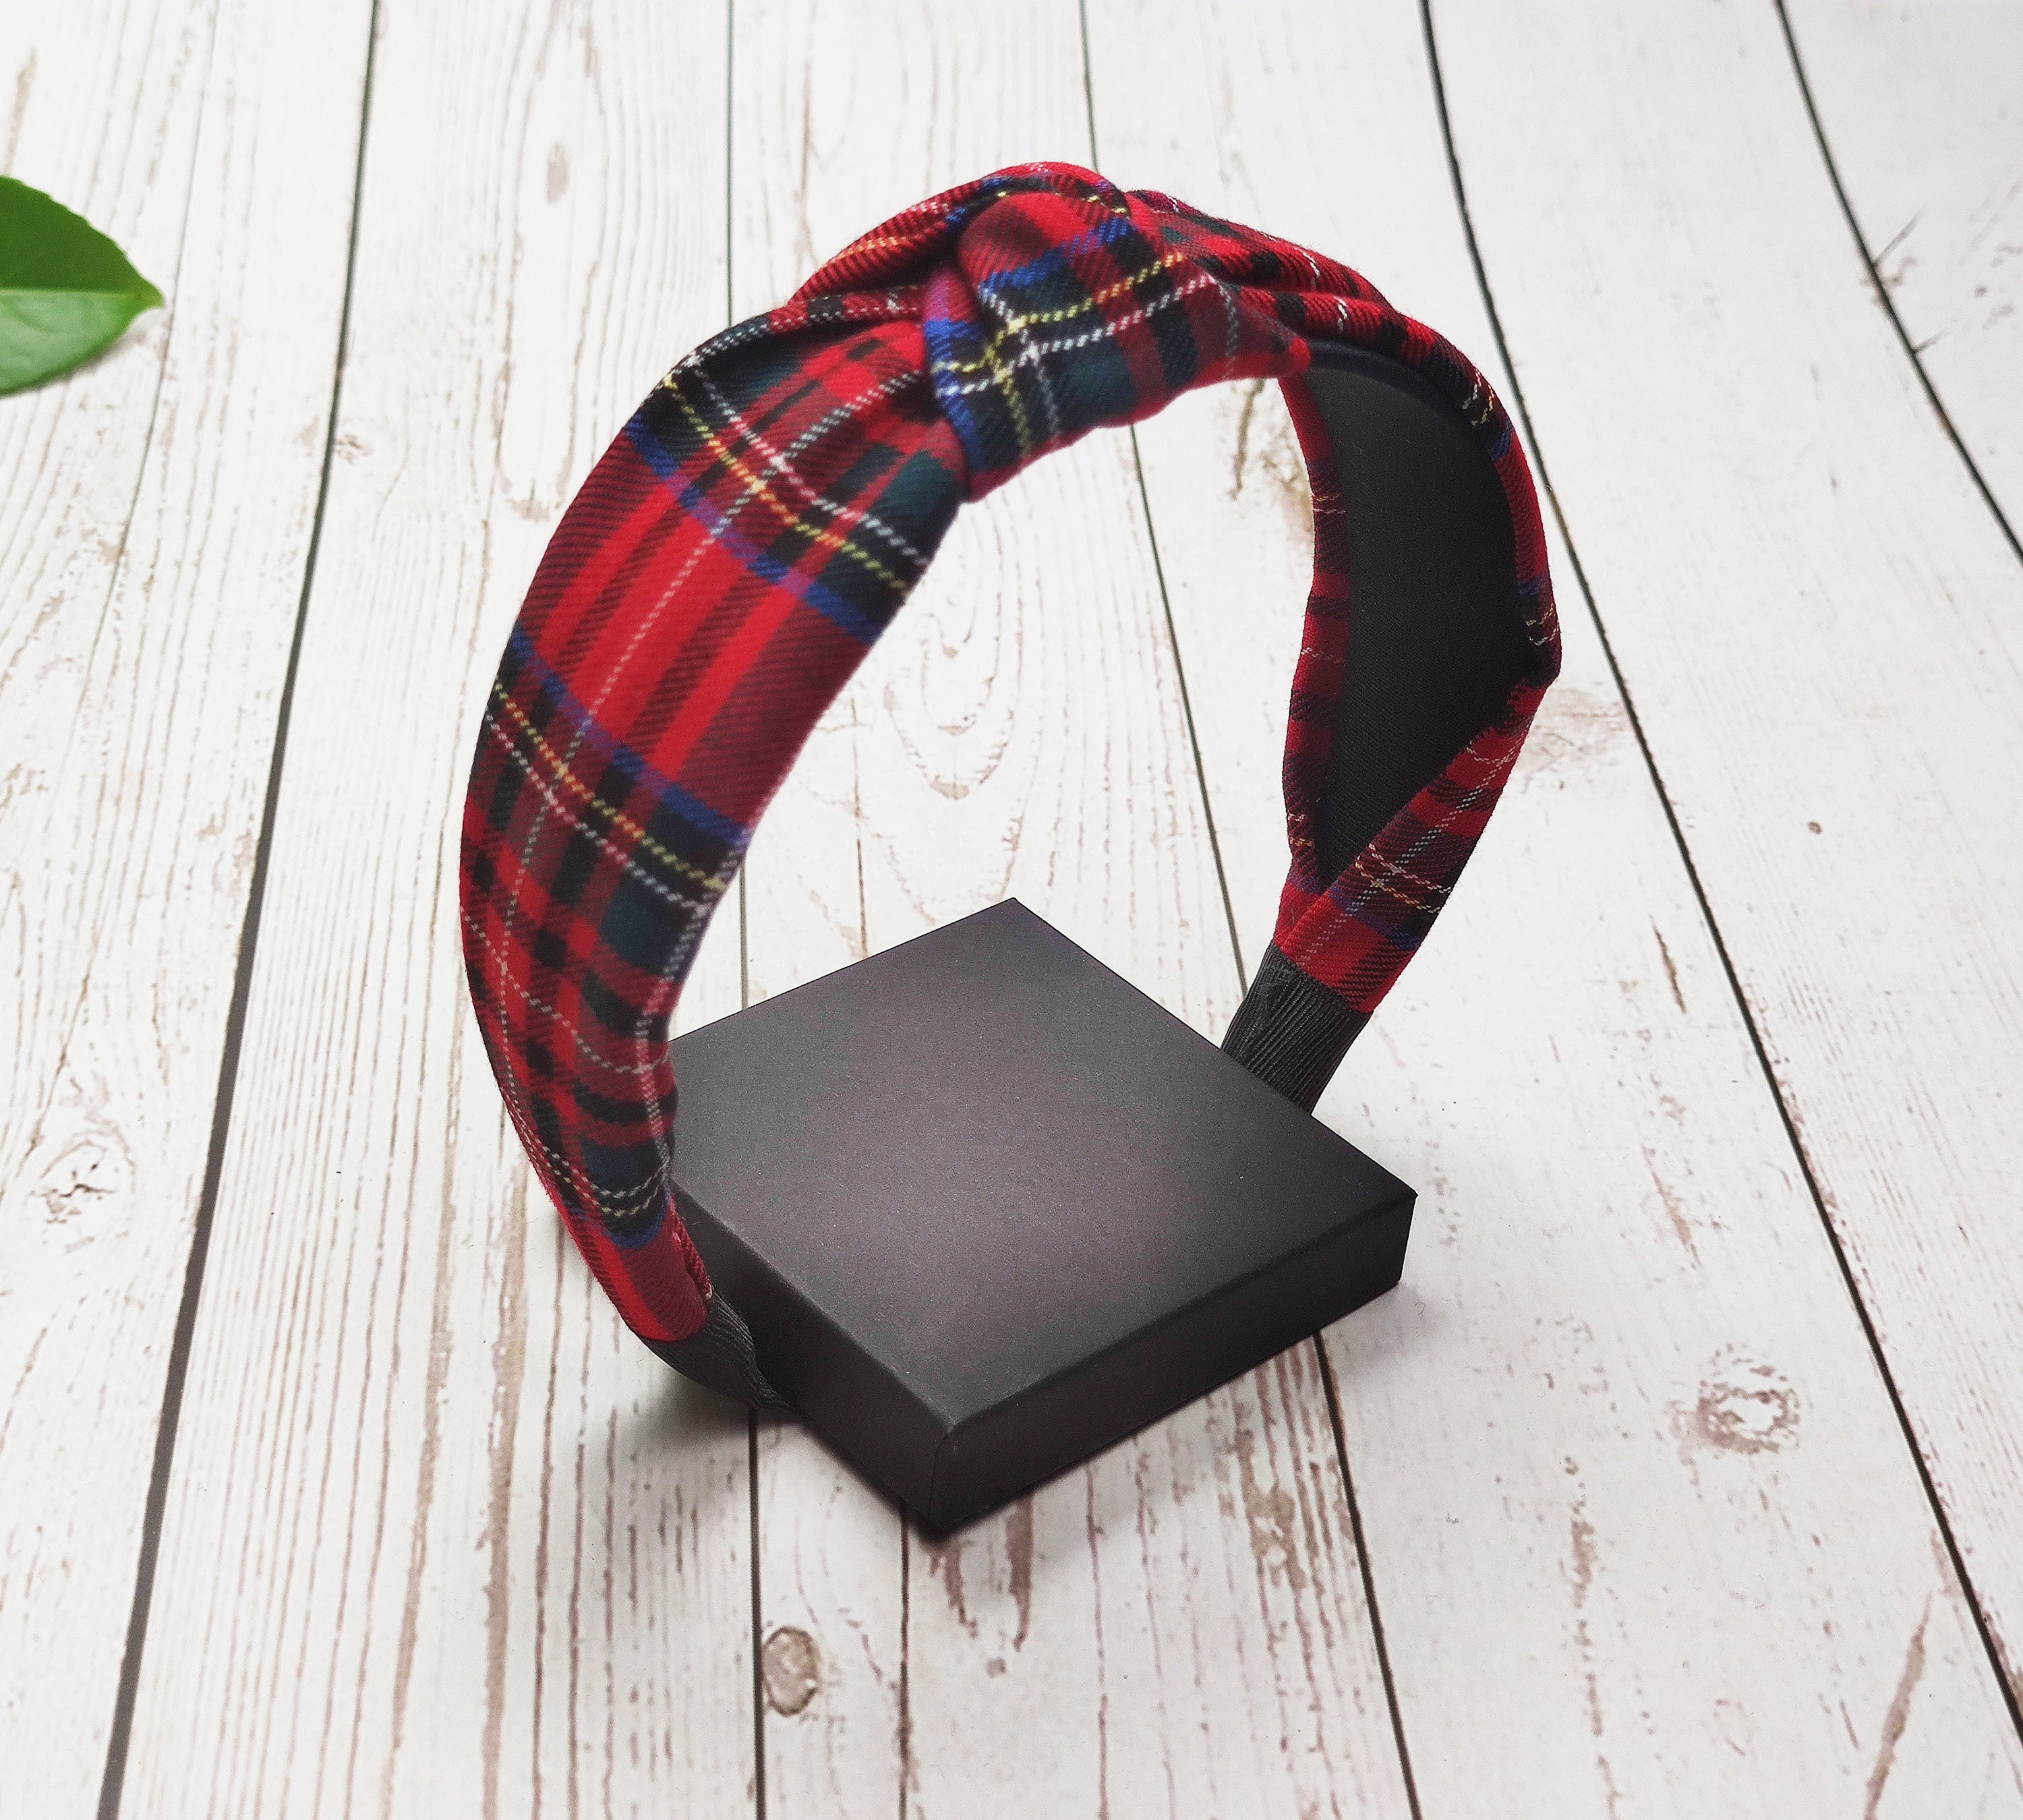 Find your favorite red plaid headband in our collection of fashion hairbands for women. From Alice band to wide headband, we have a headband that will complement all your autumn and winter outfits.